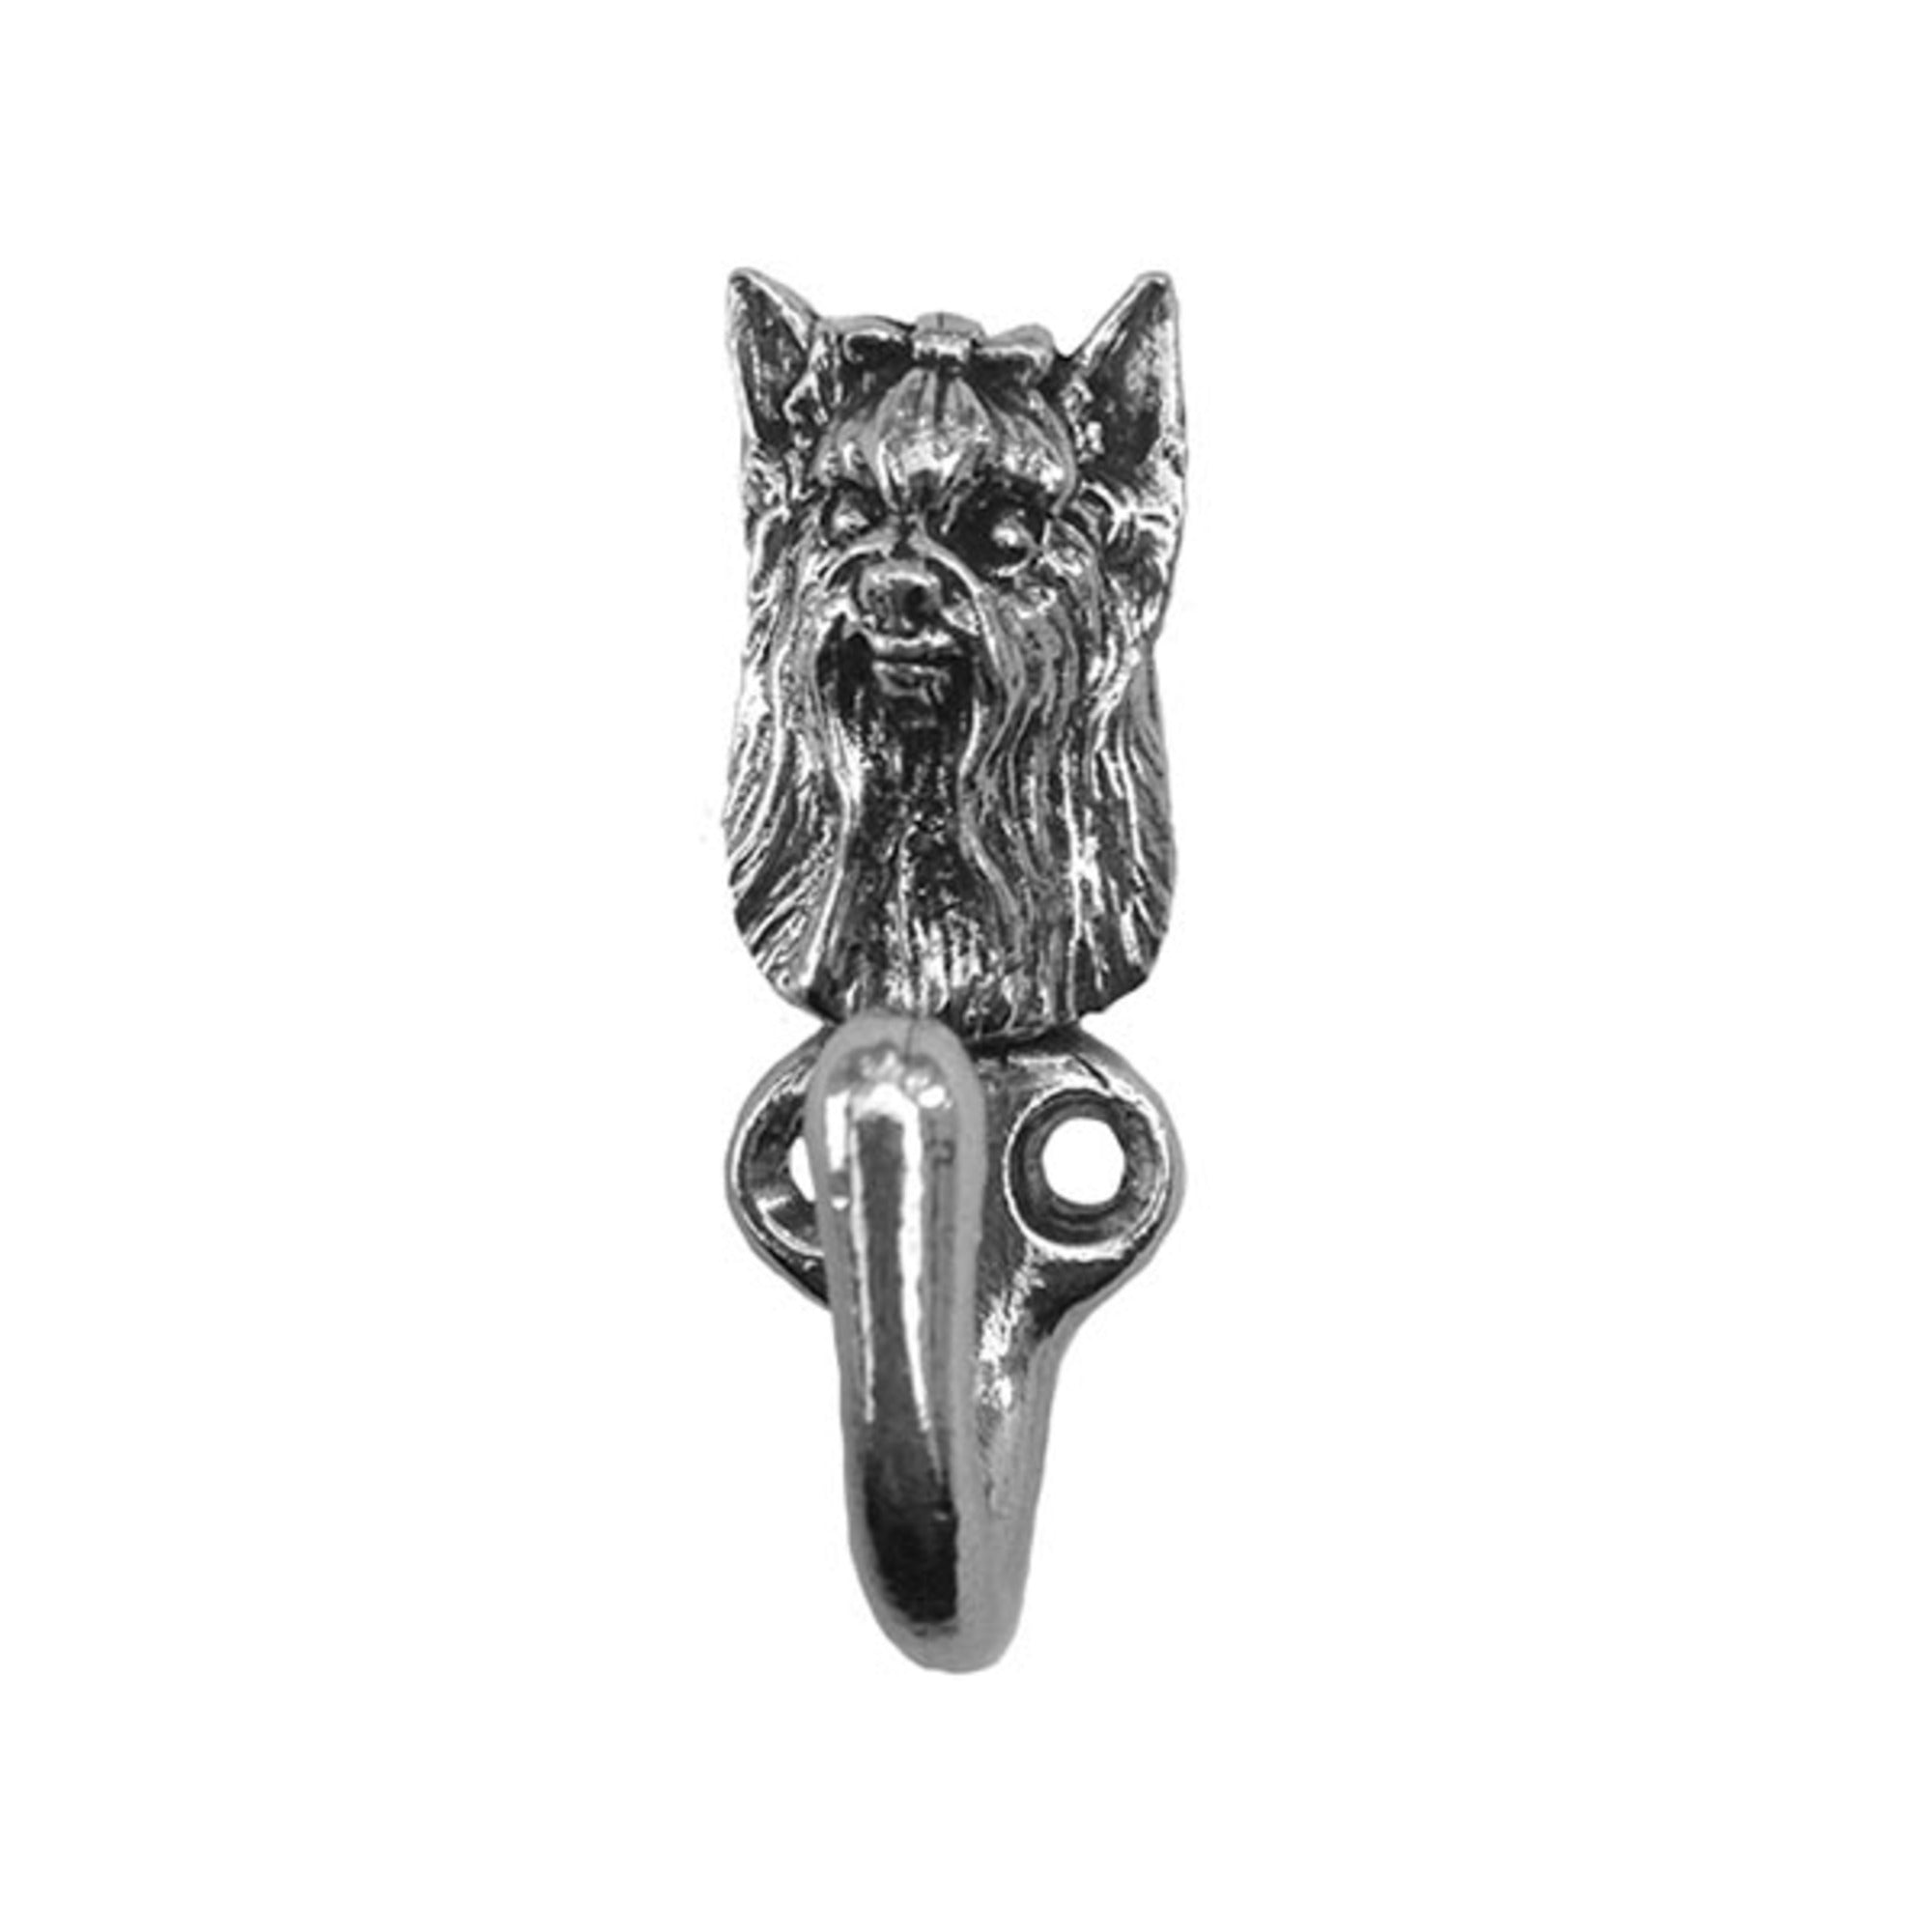 New-Spin Metal Casting Yorkie Leash Hook